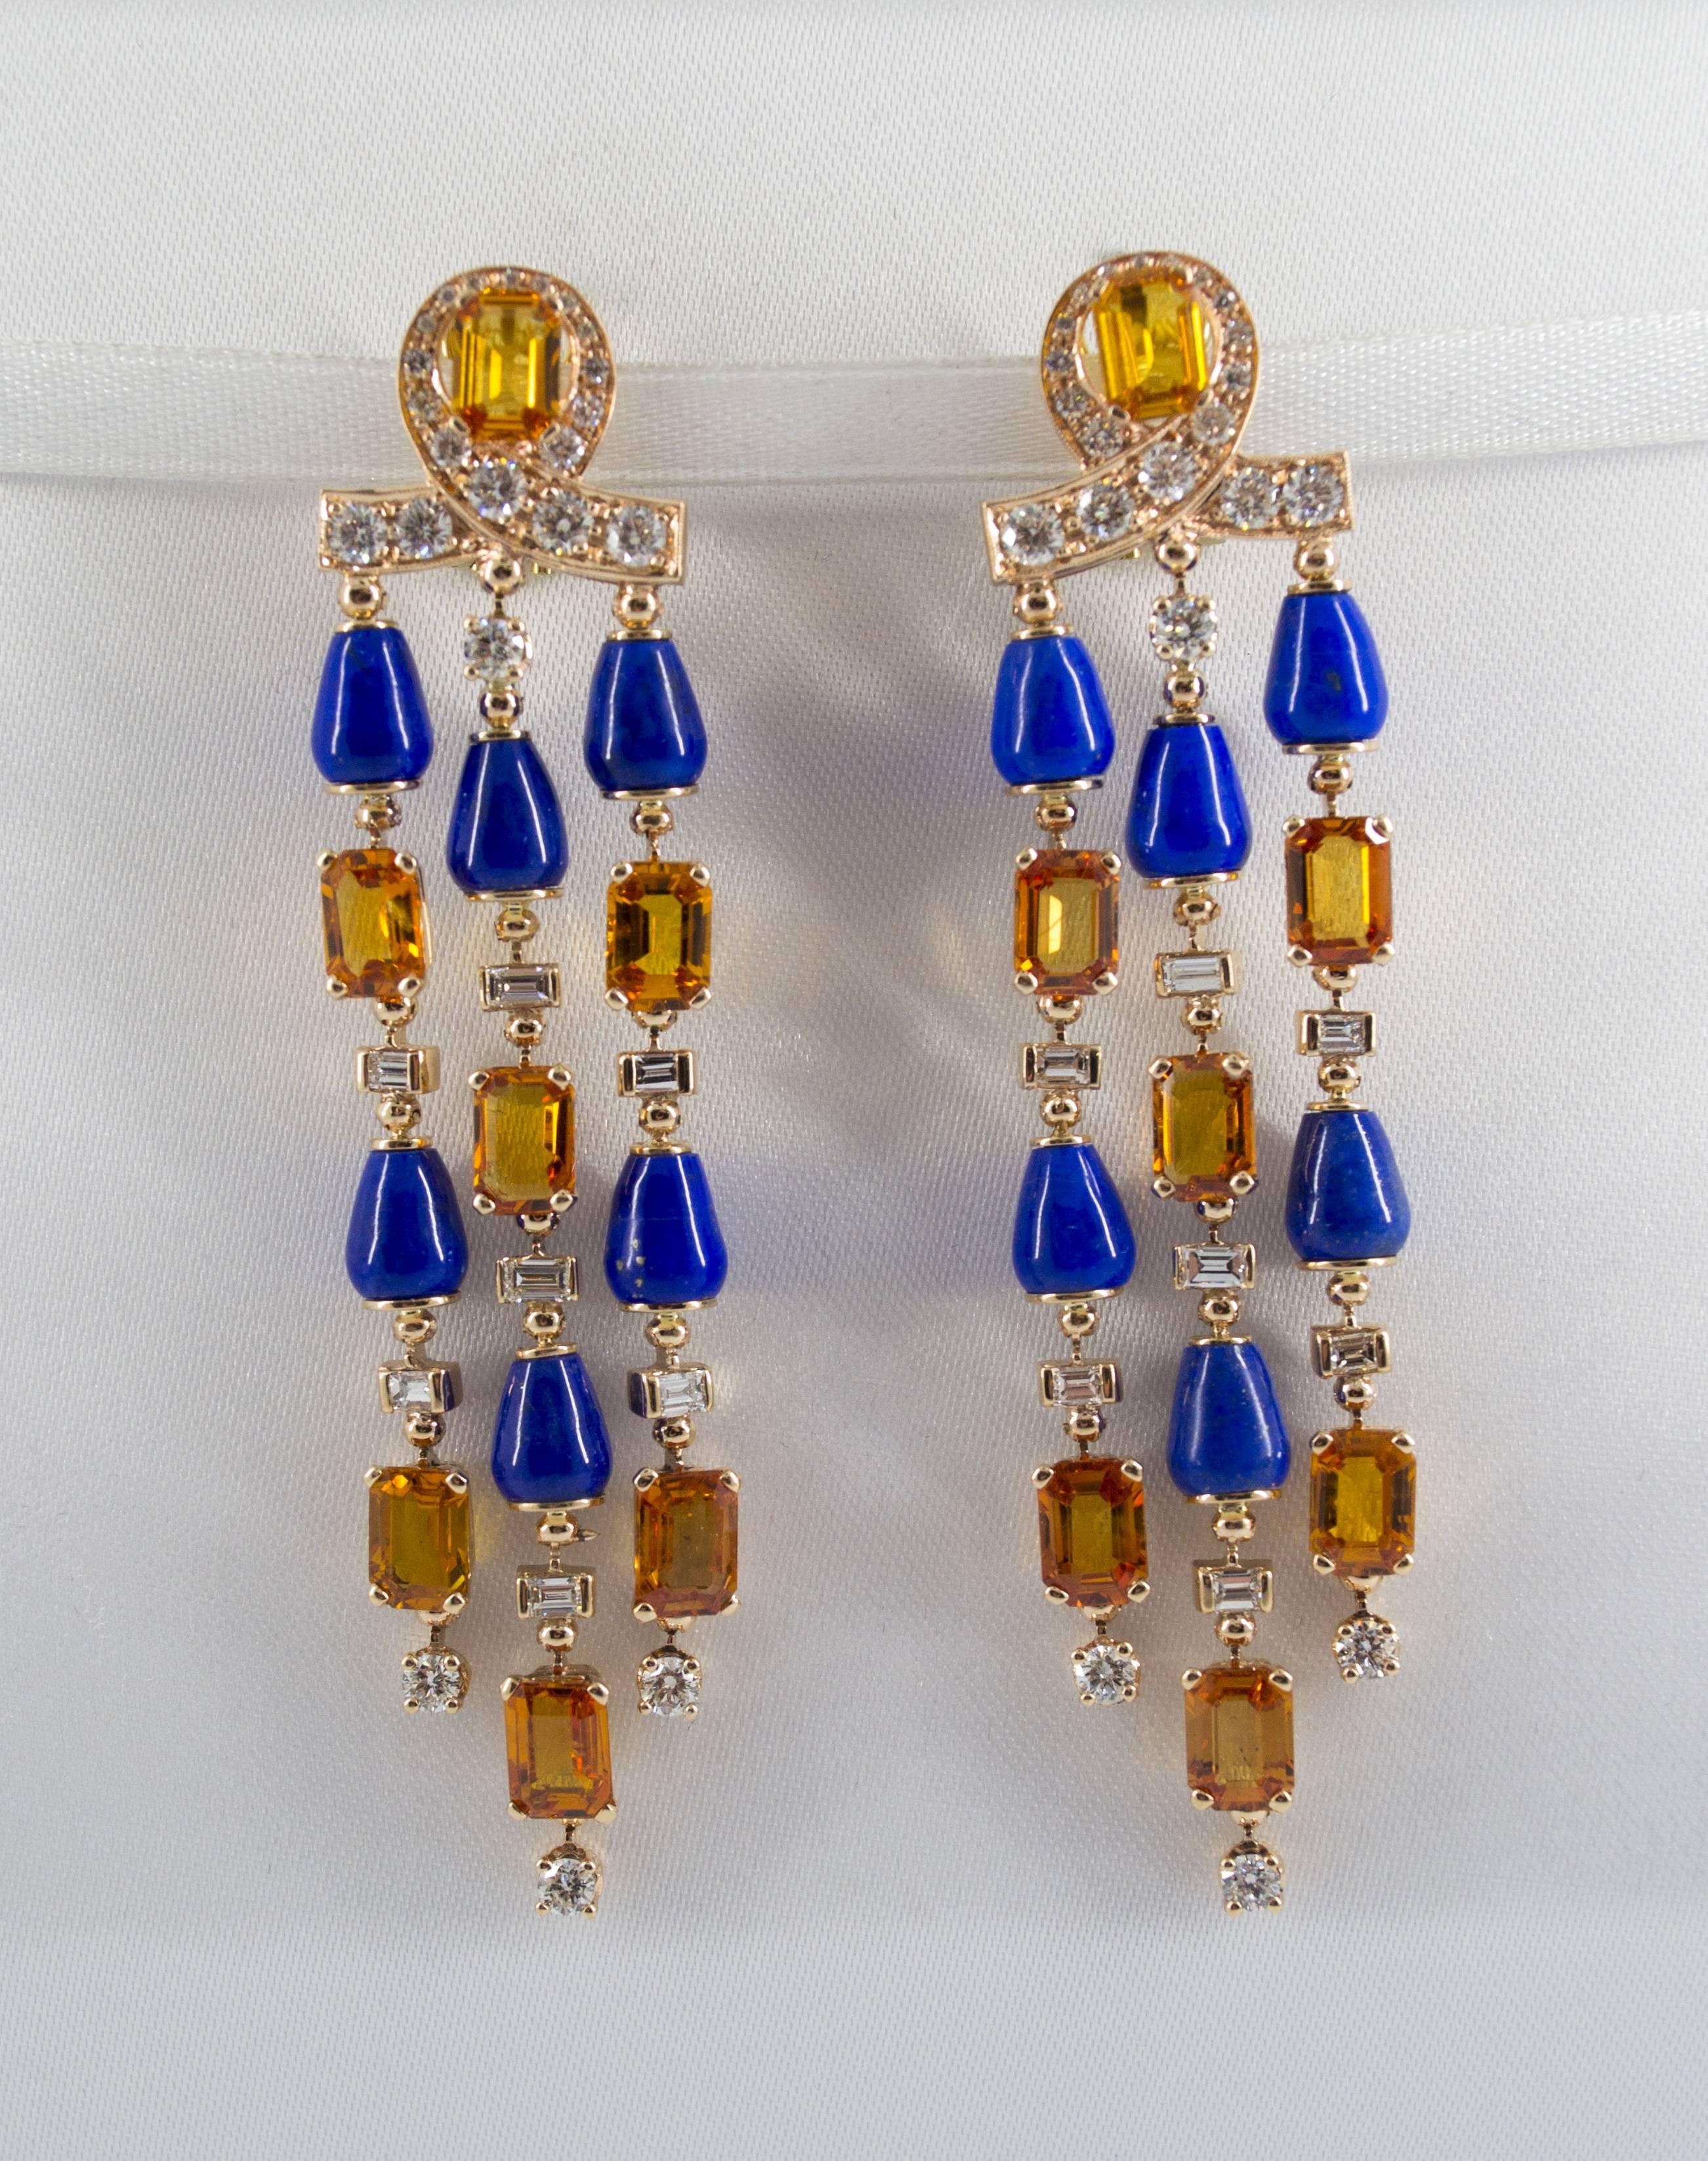 Brilliant Cut Art Deco Style White Diamond Yellow Sapphire Lapis Yellow Gold Clip-On Earrings For Sale